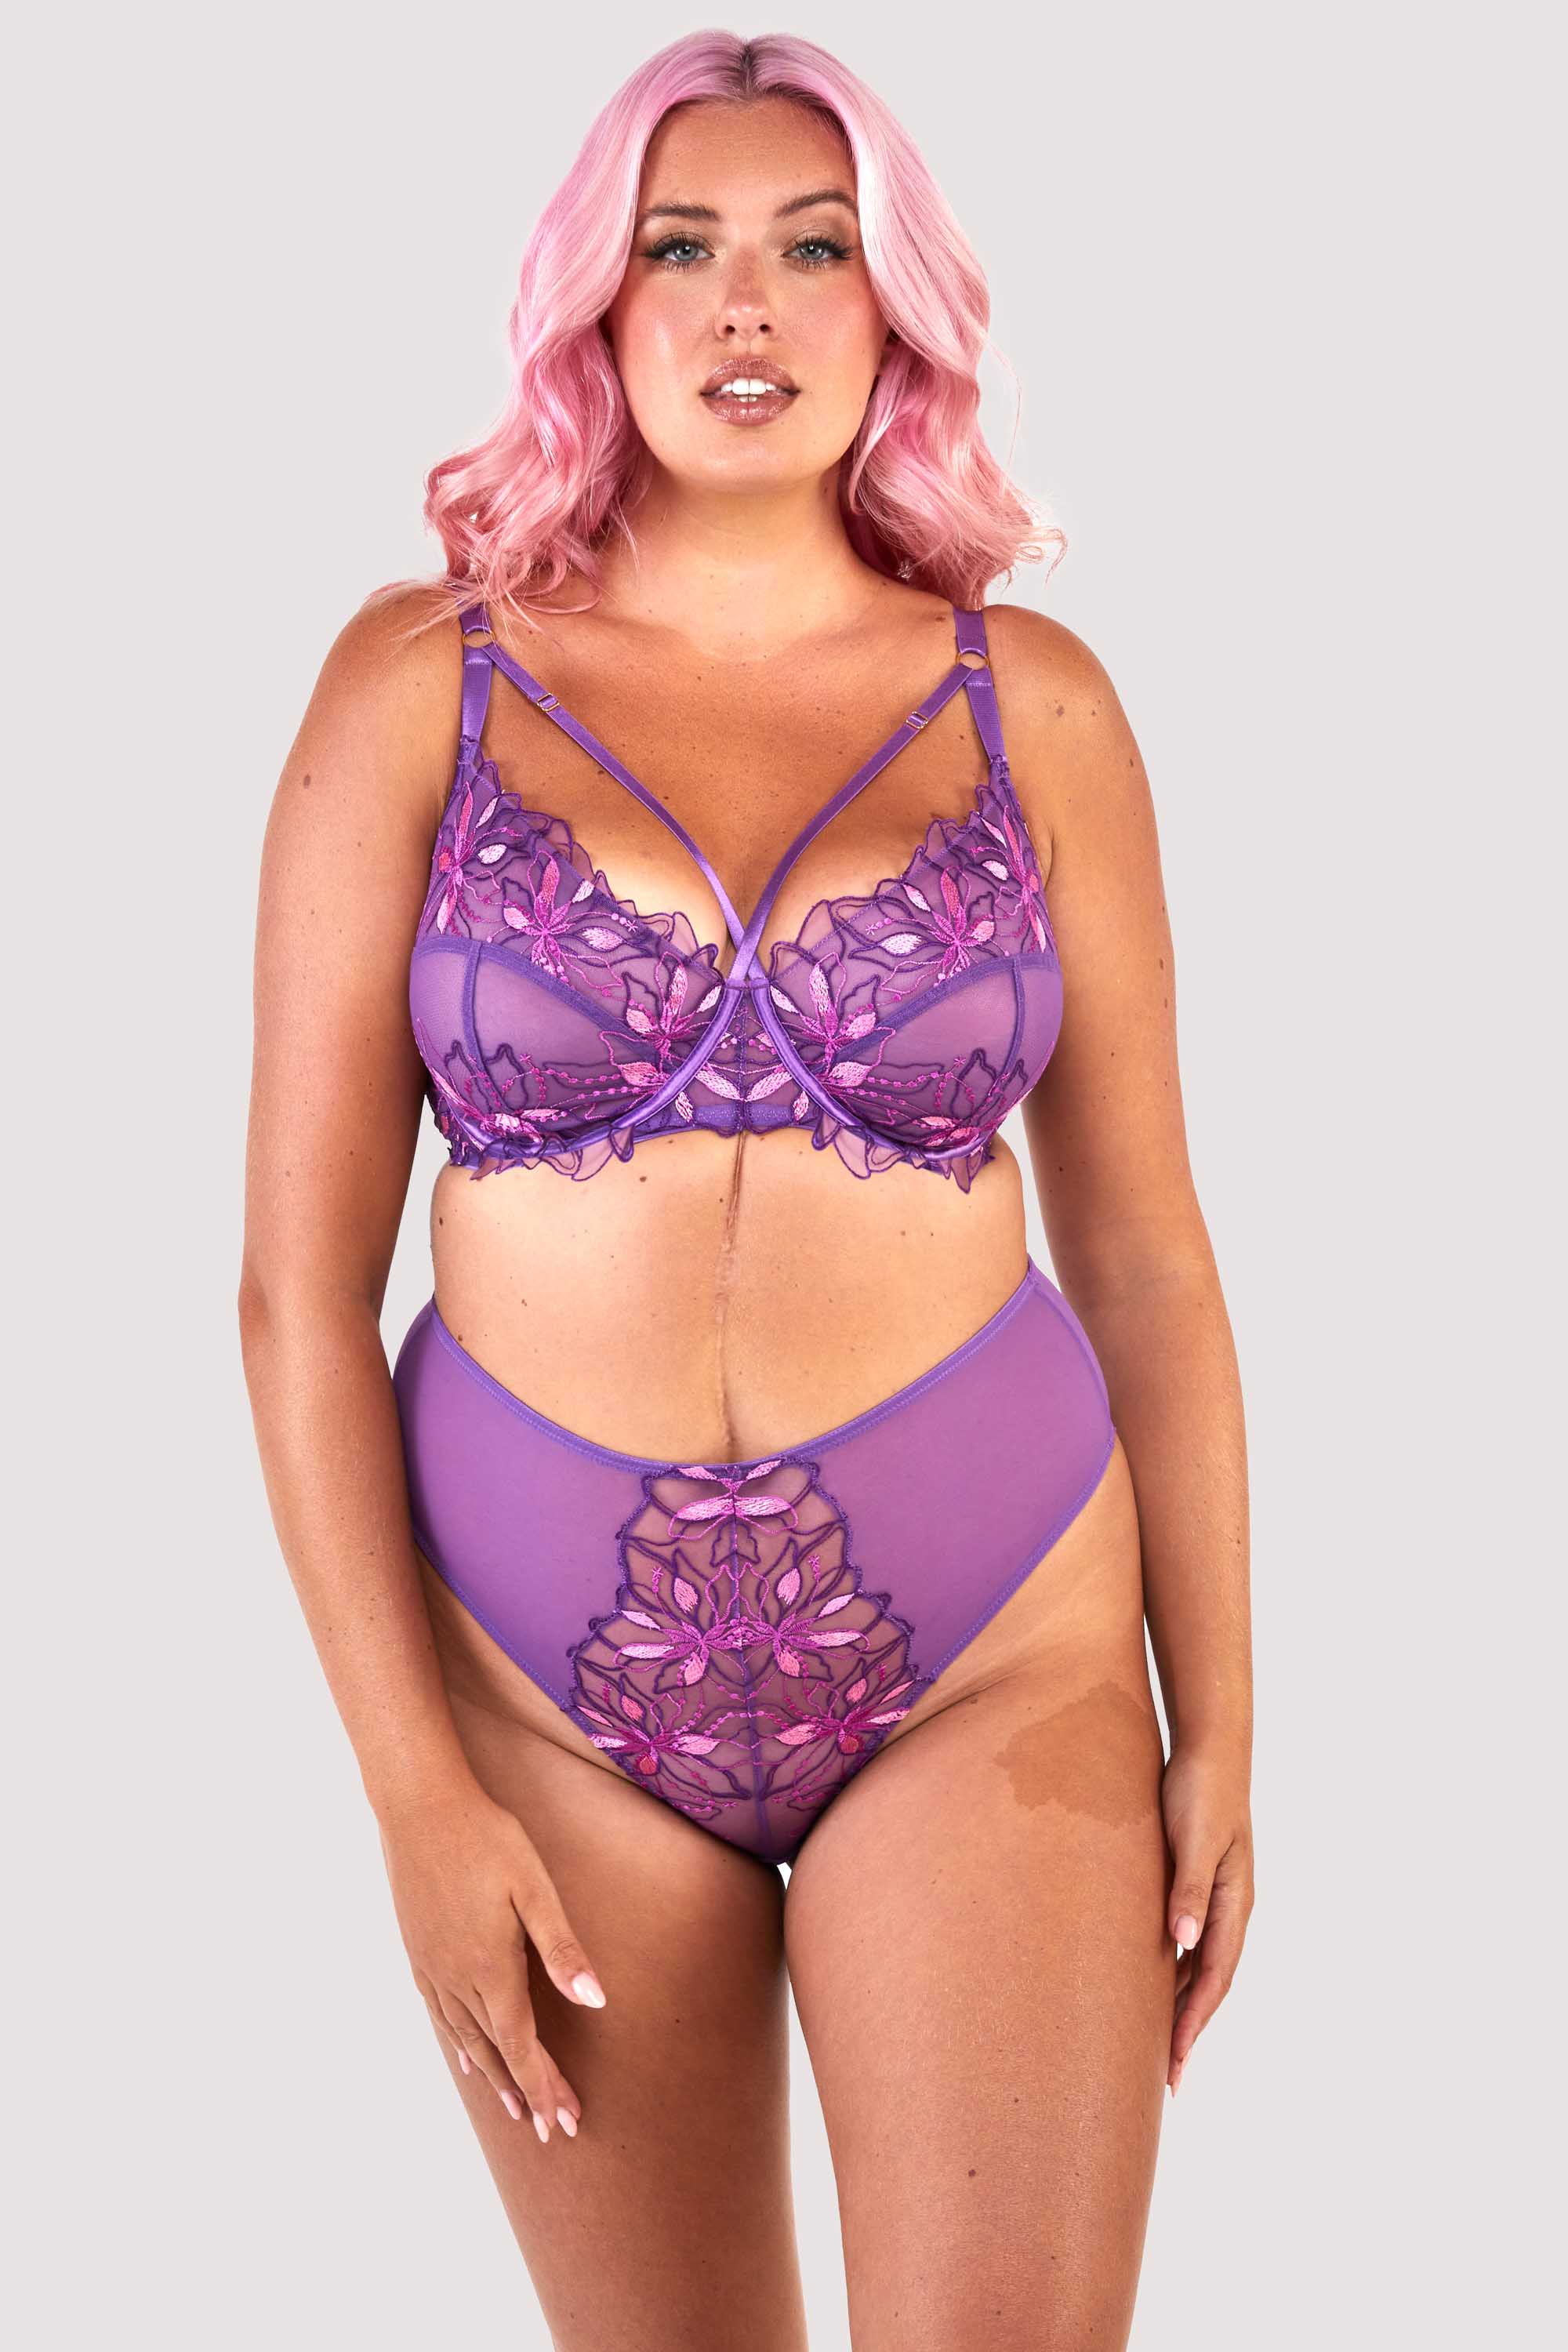 Mesh purple thong with an embroidered pink and purple panel in the front, worn with a matching bra, worn with a matching bra.